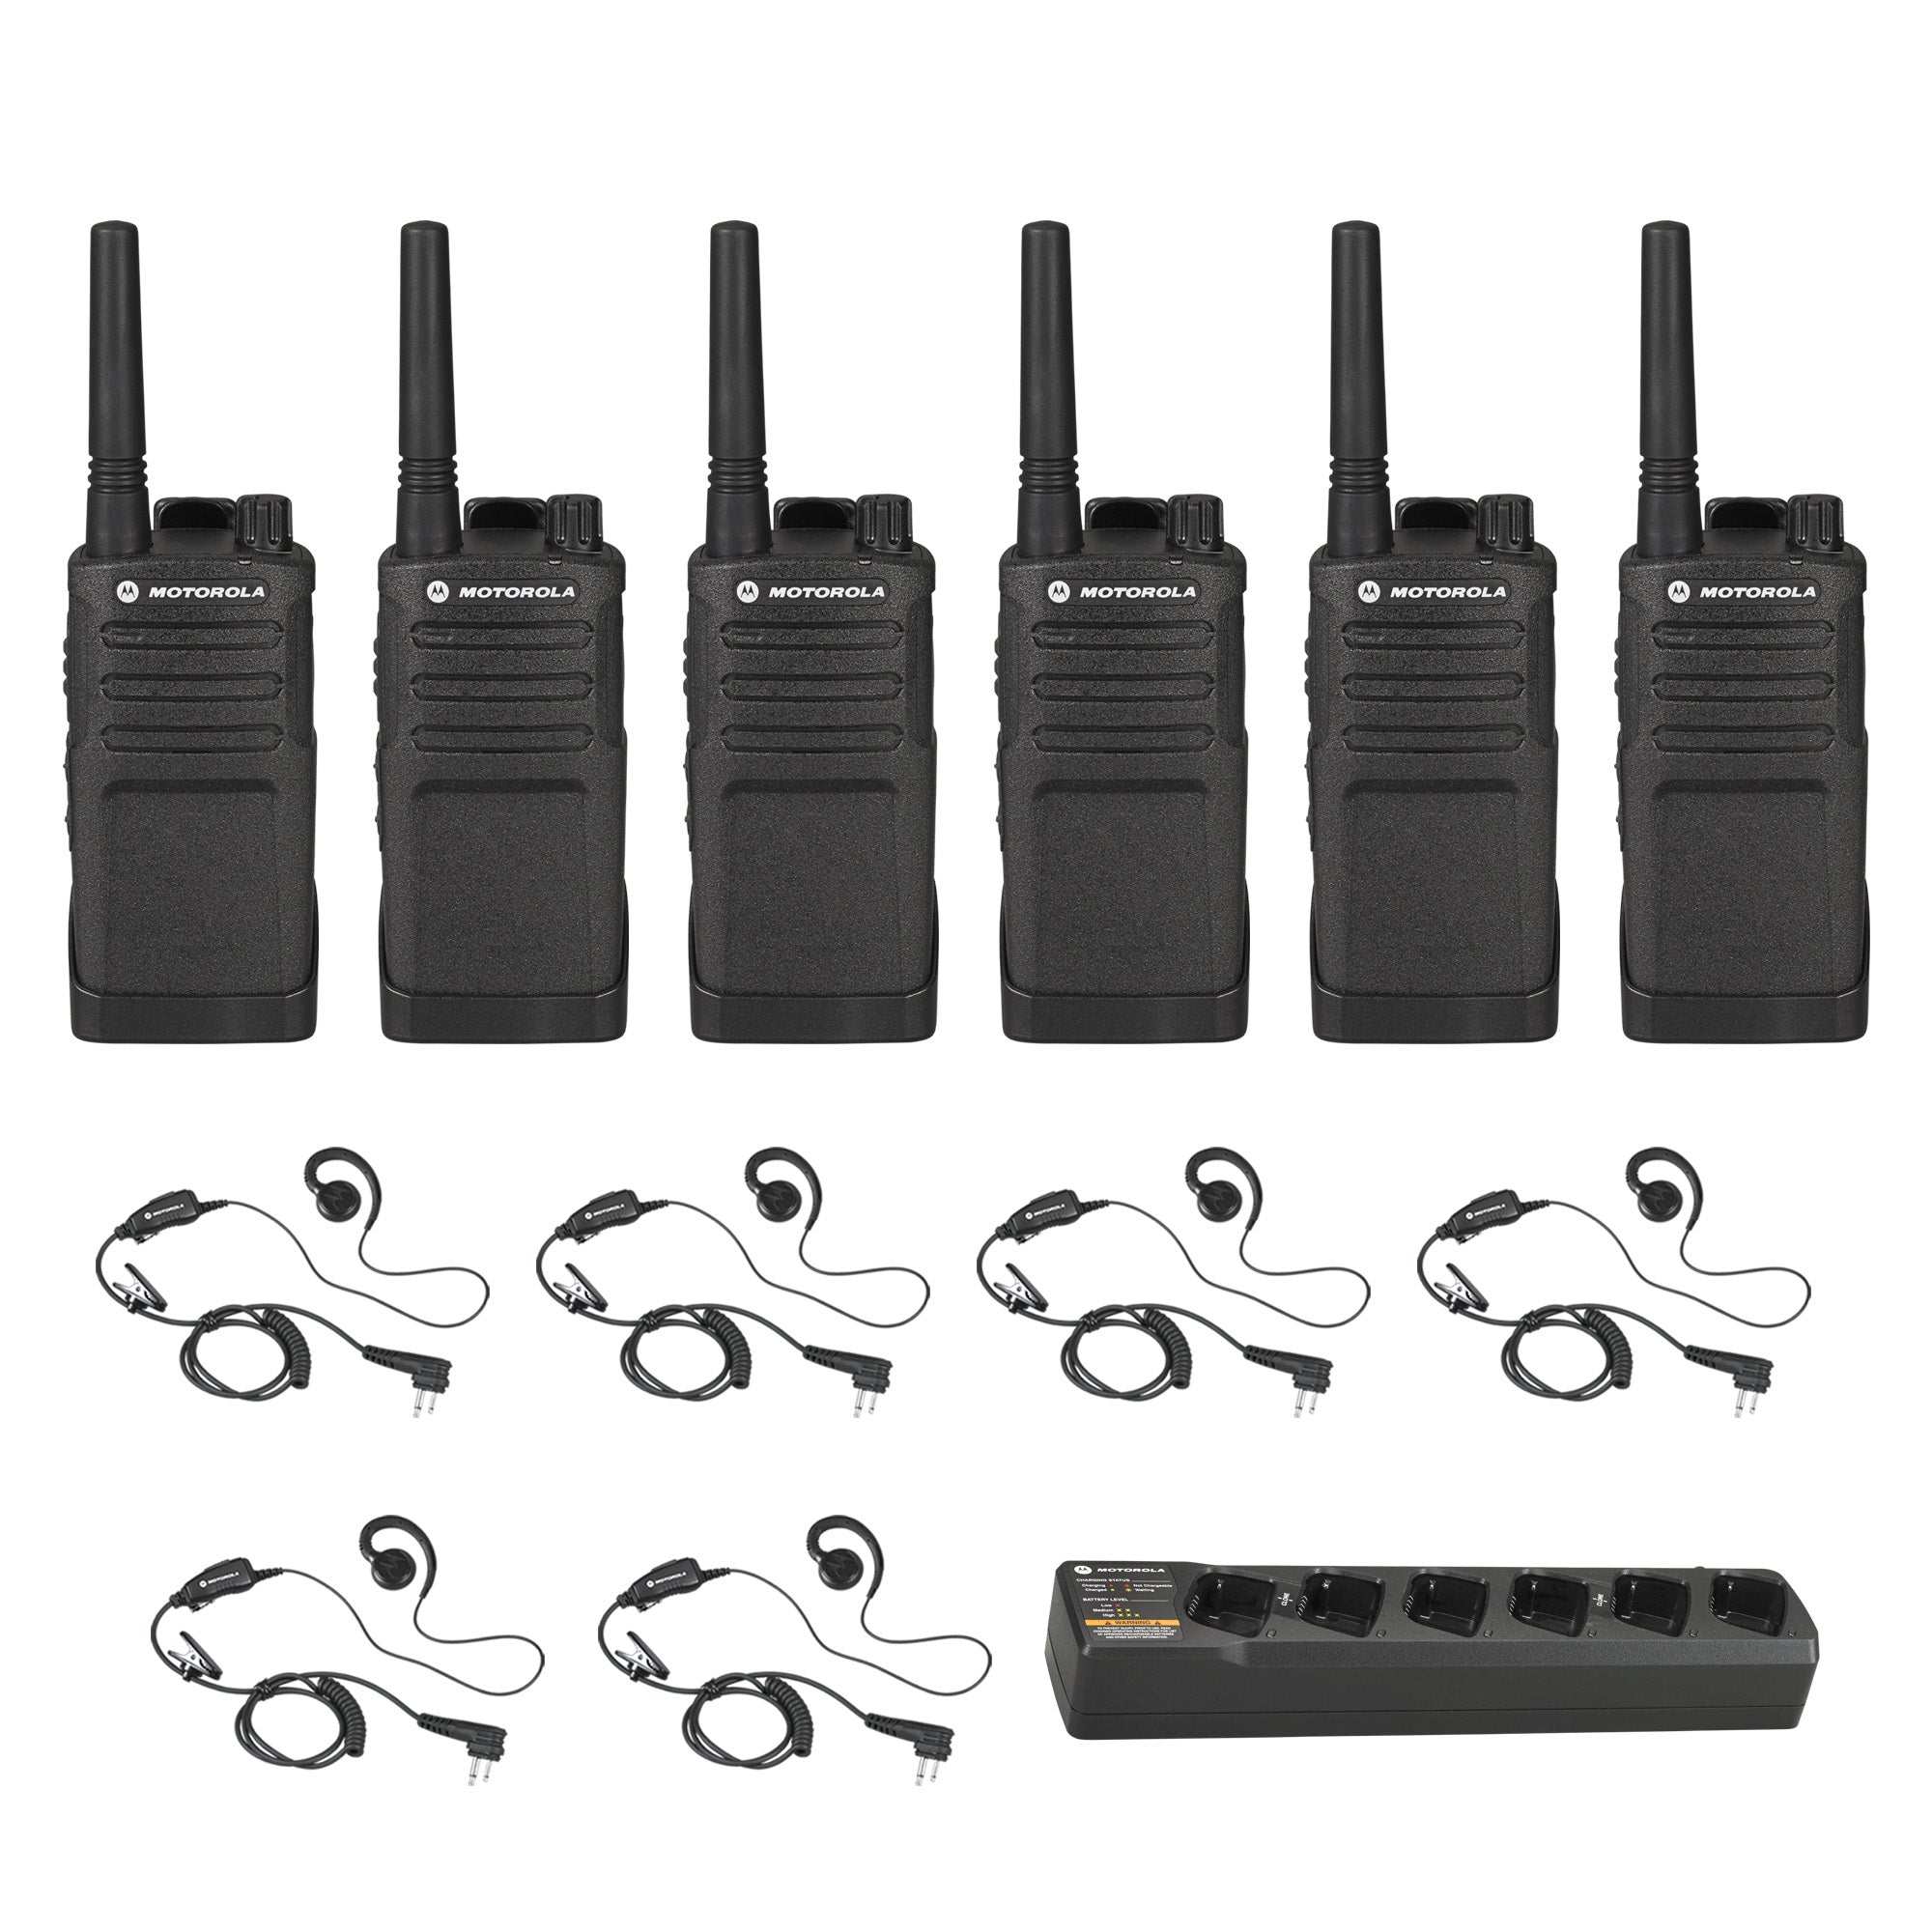 Motorola RMU2040 pack with Multi Charger and Headsets| TwoWayRadioGear